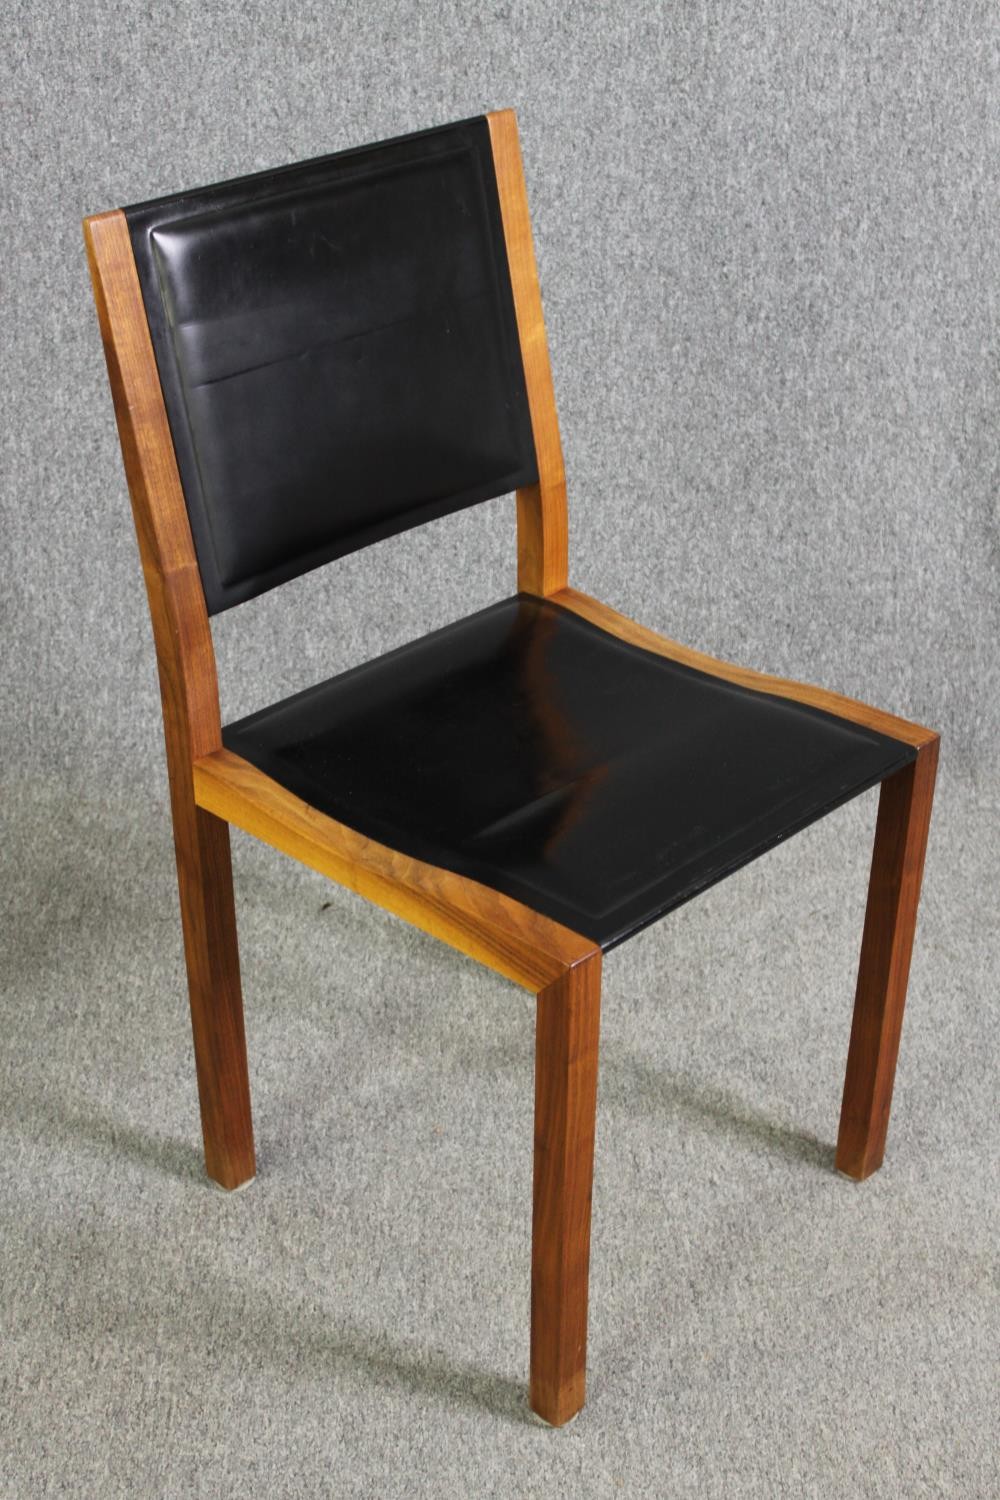 A pair contemporary Heal's teak and black leather dining chairs - Image 4 of 6